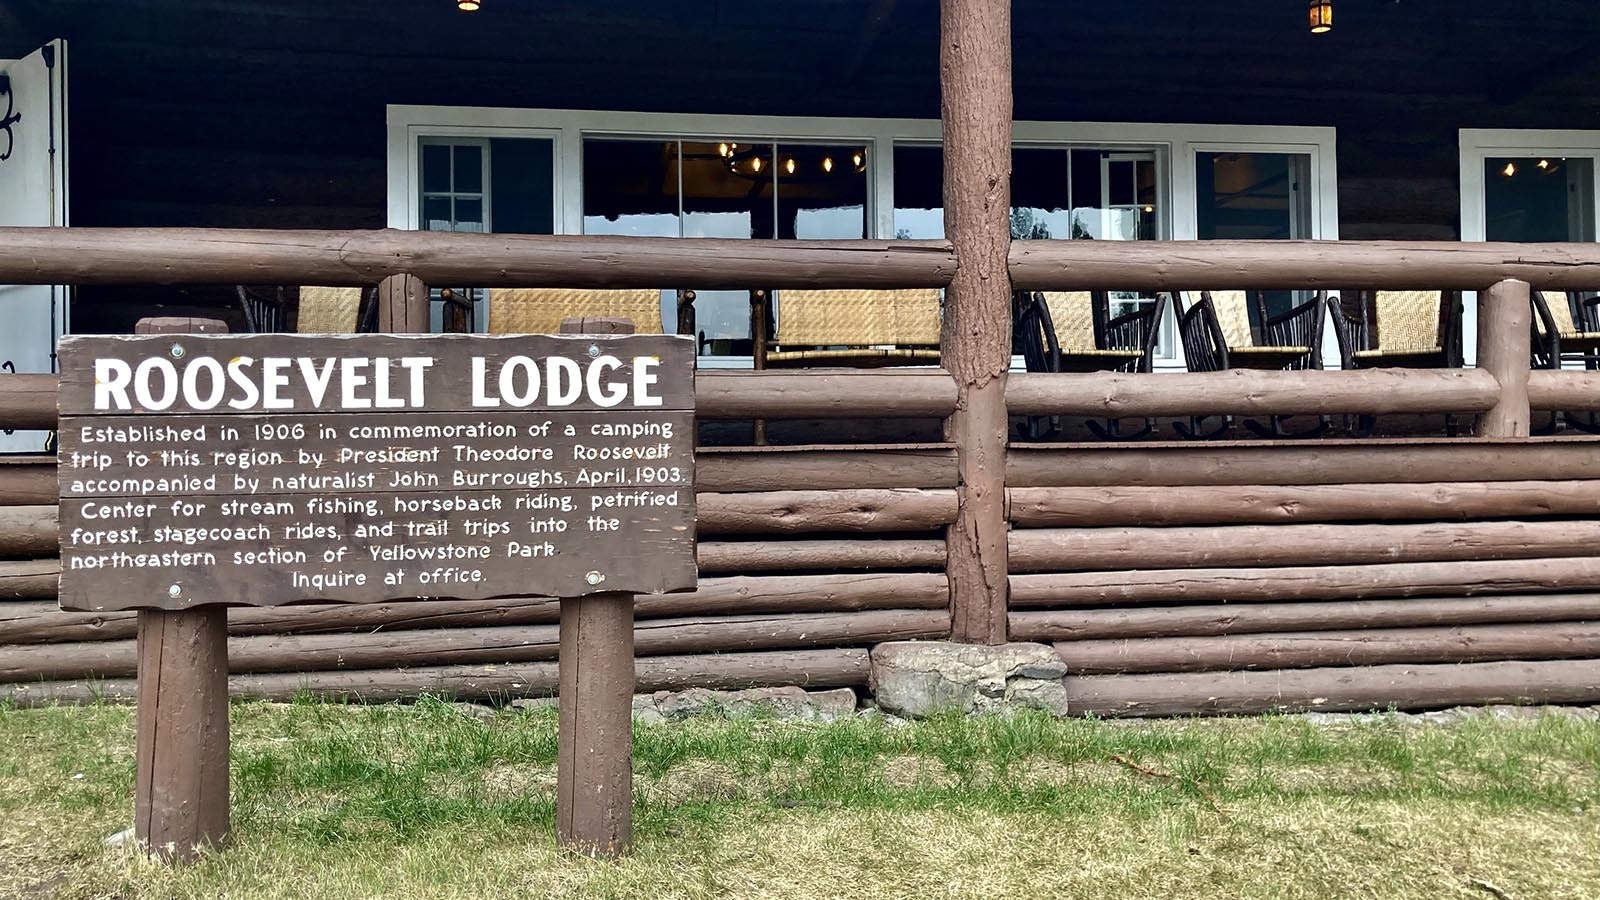 The Roosevelt Lodge in Yellowstone National Park.